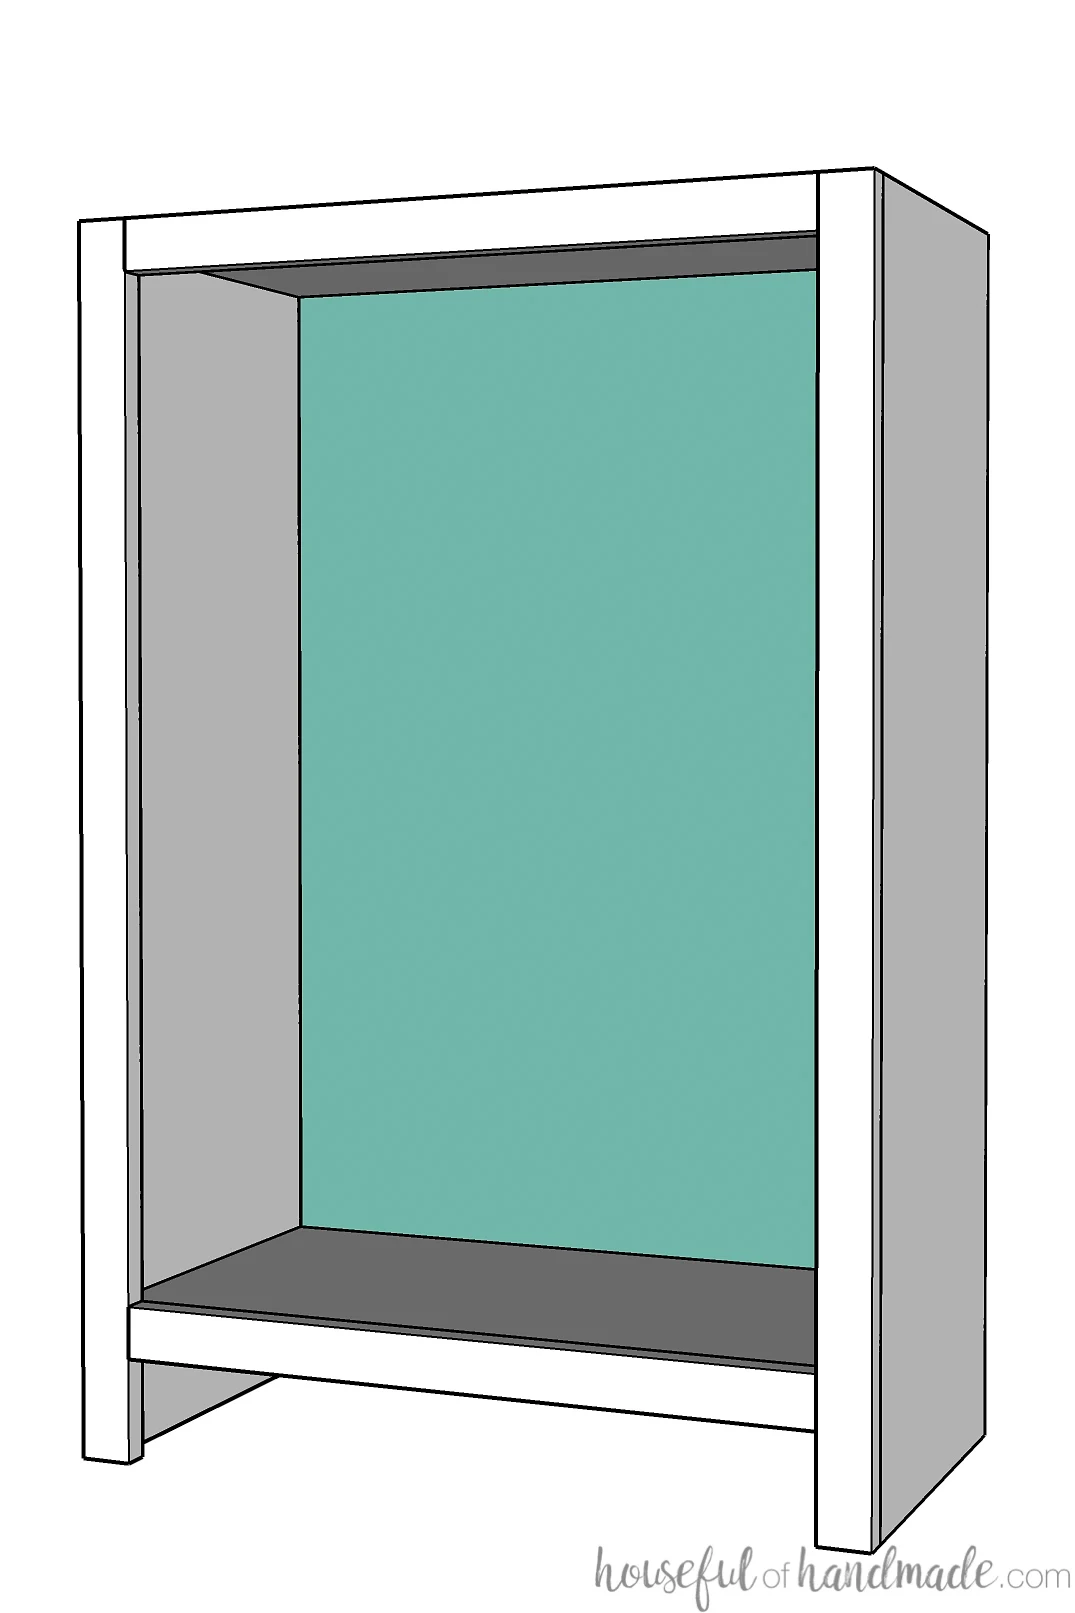 Sketch of the back panel attached to the finished bookcase.